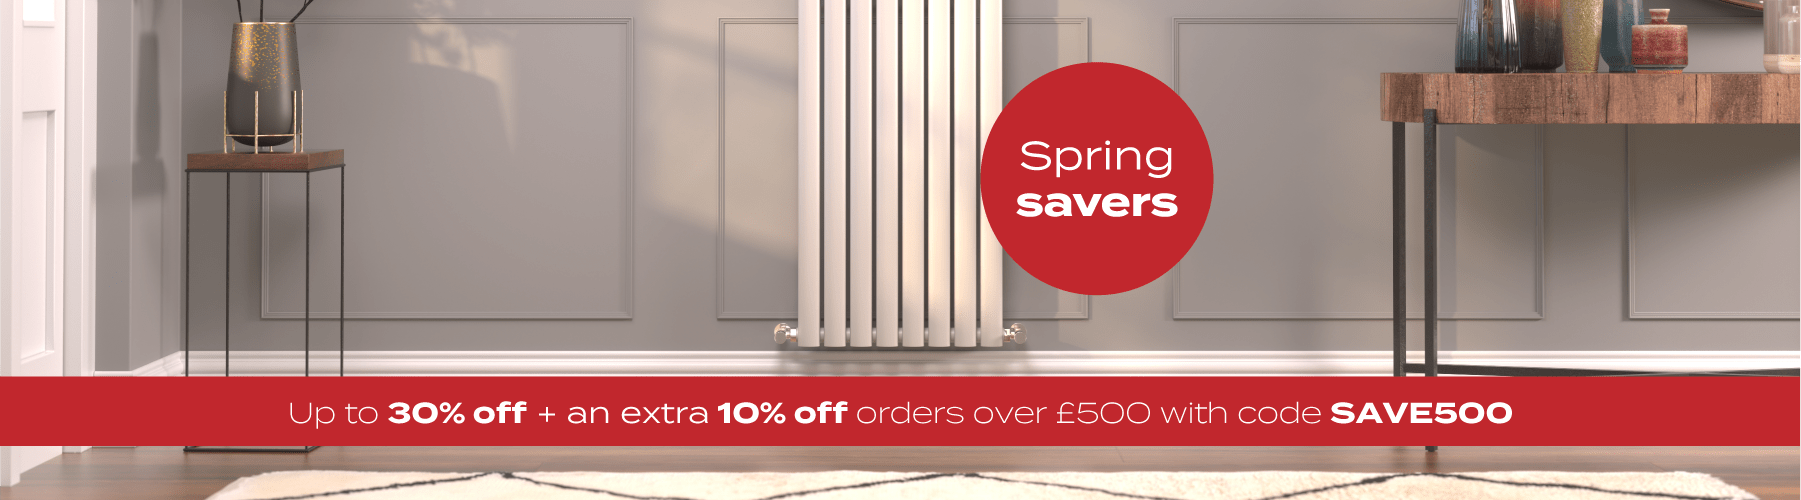  SPRING SAVERS up to 30% off + an extra 10% off orders over £500 with code SAVE500 